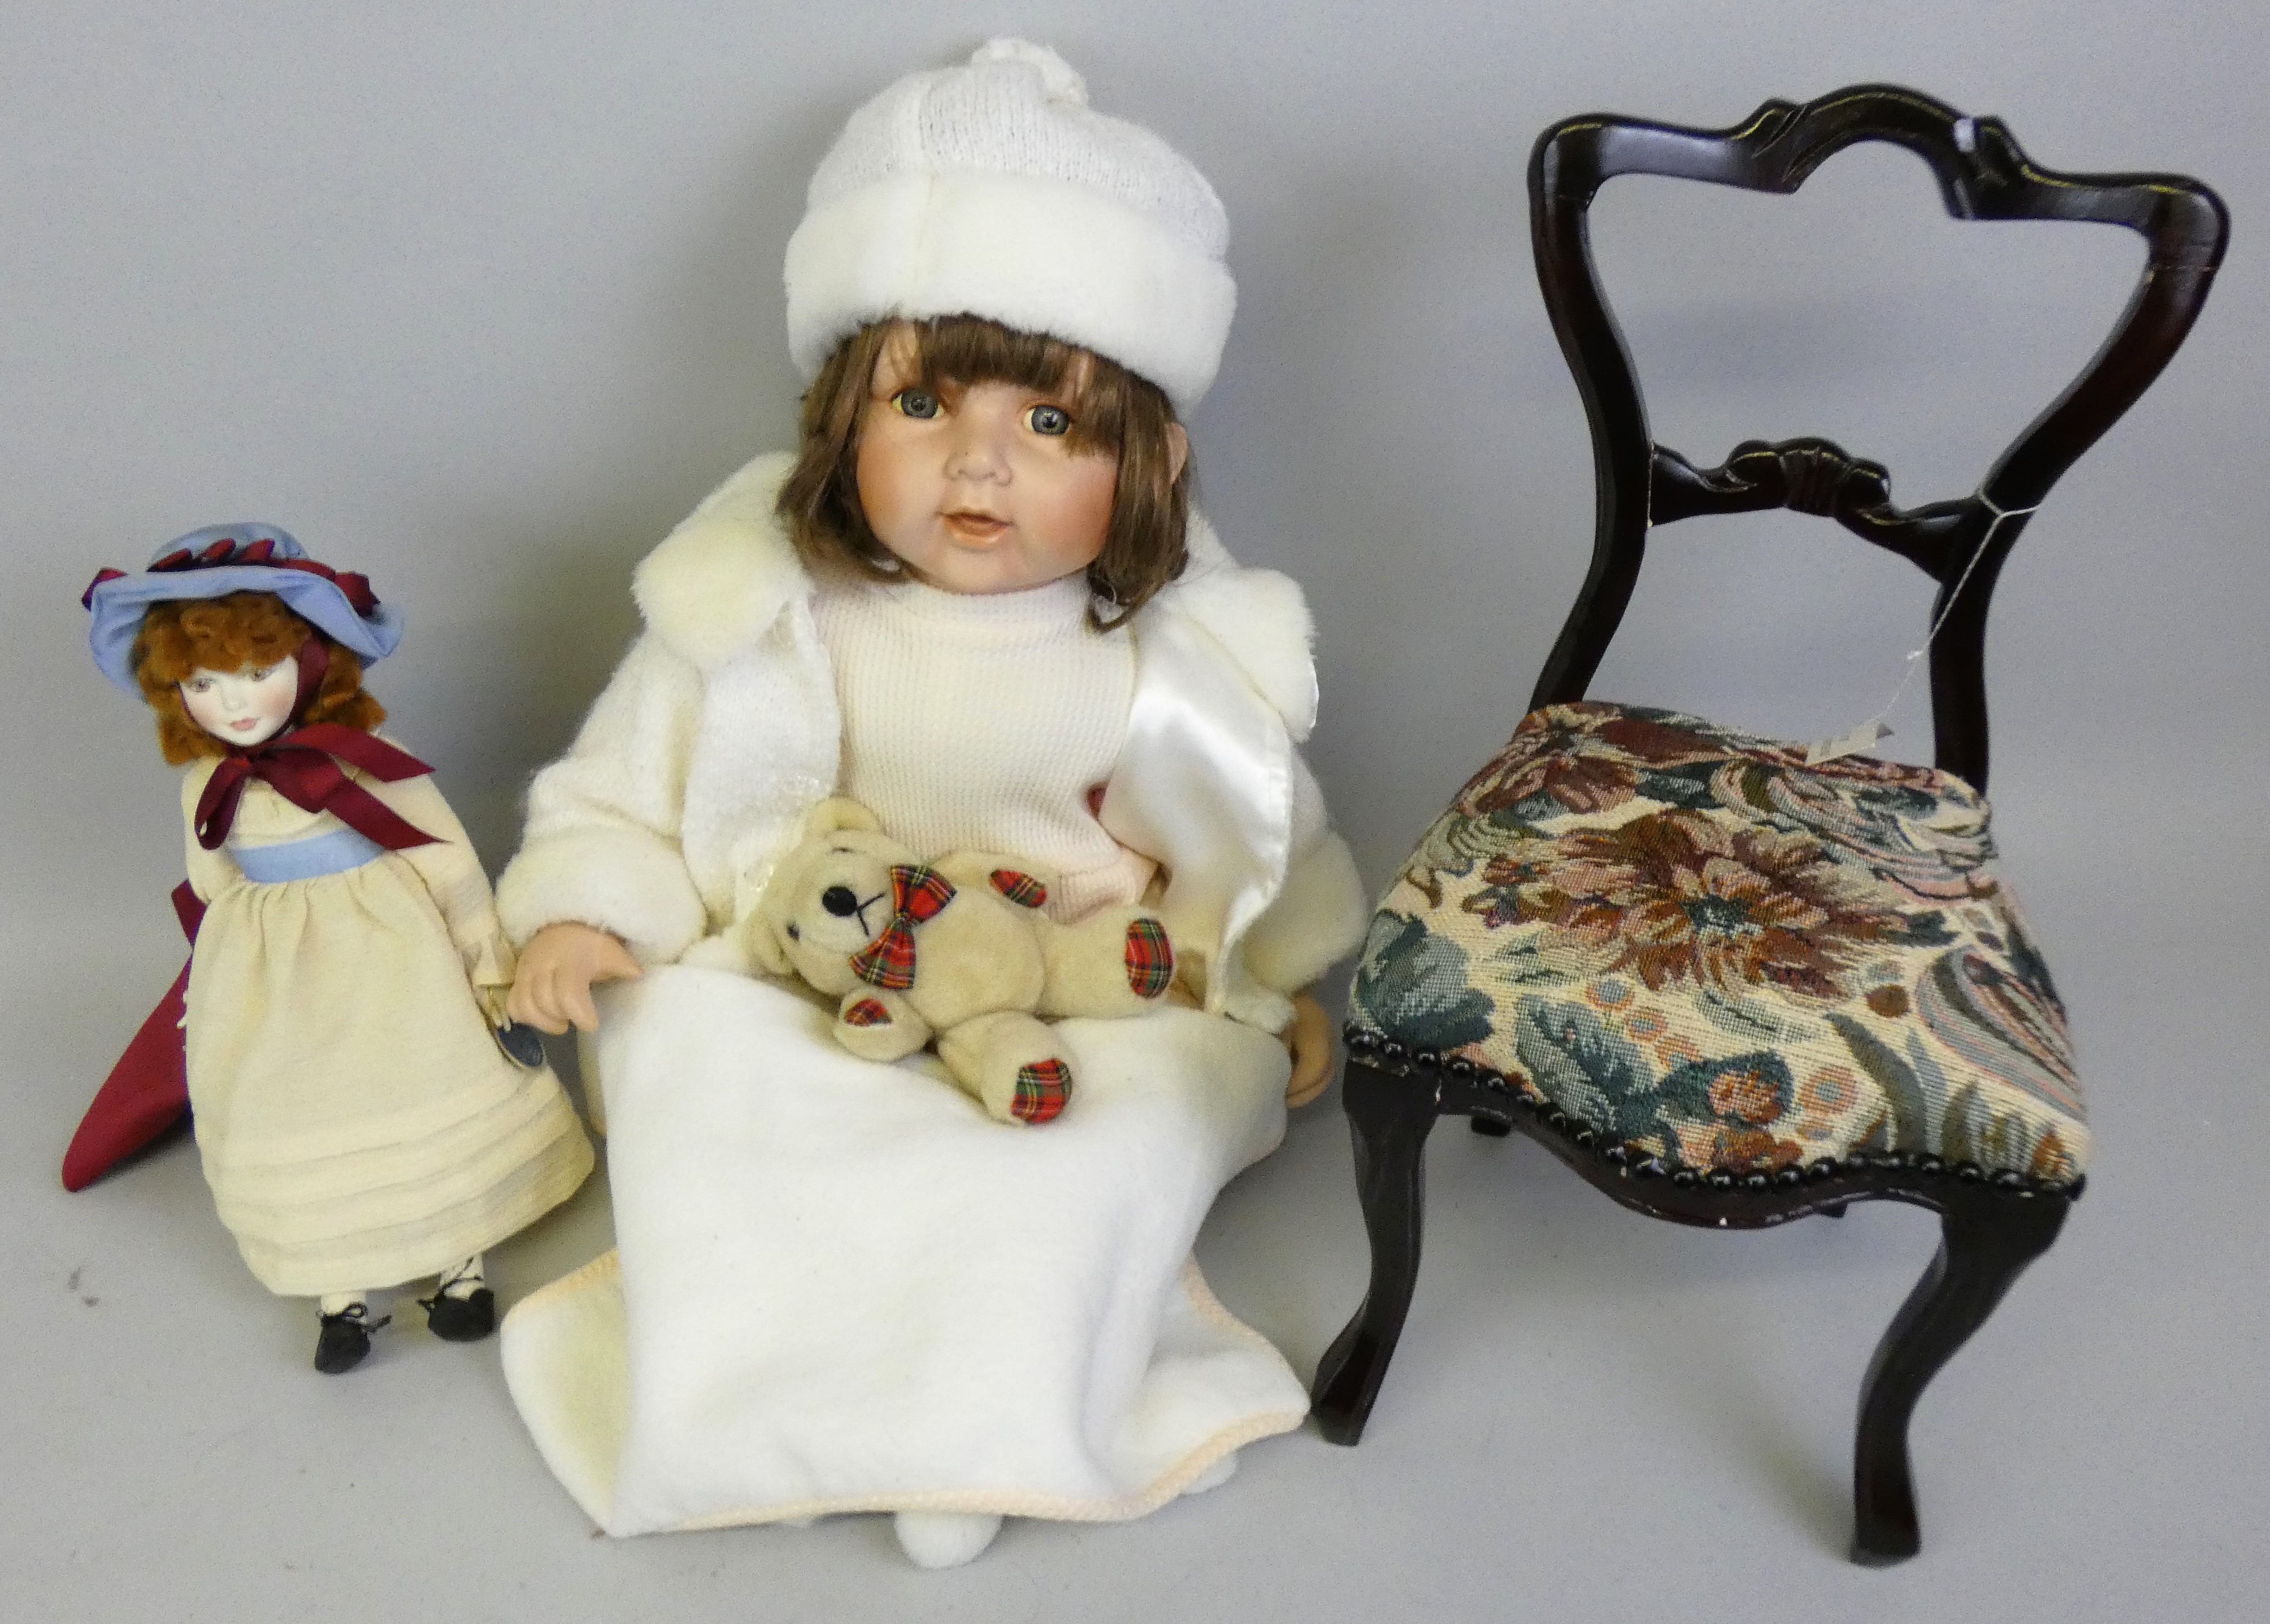 A Royal Doulton Nisbet porcelain limited edition doll "Little Model", No. 3882/5000, together with a